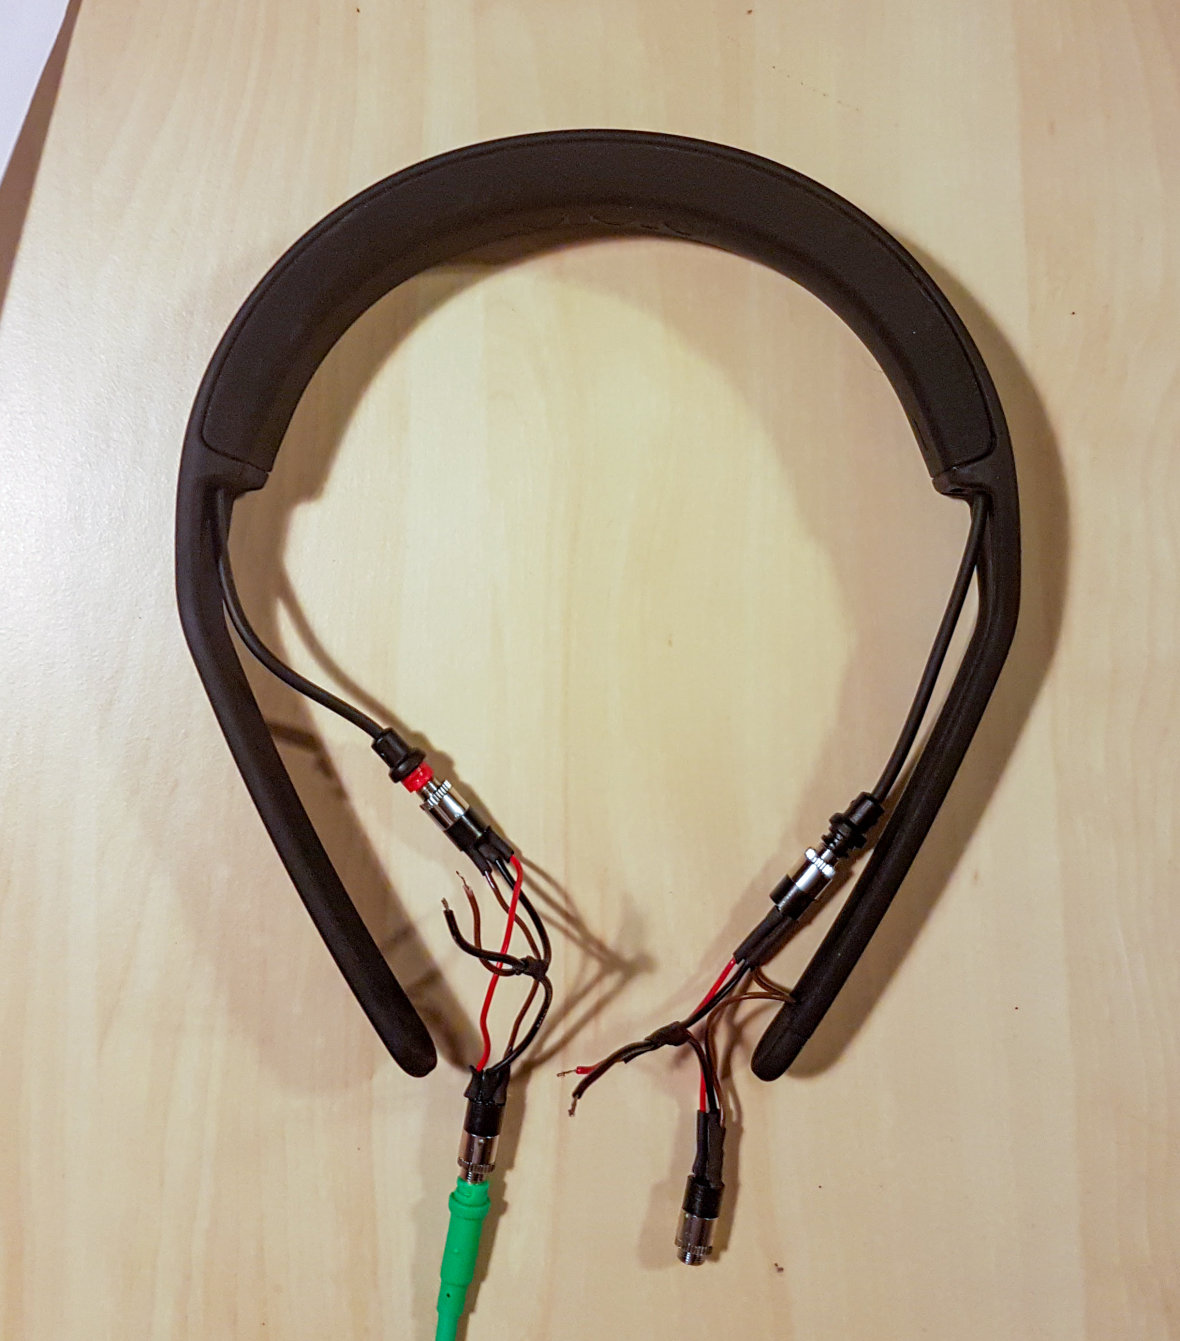 Aux jacks hooked up to headband, to be soldered to drivers